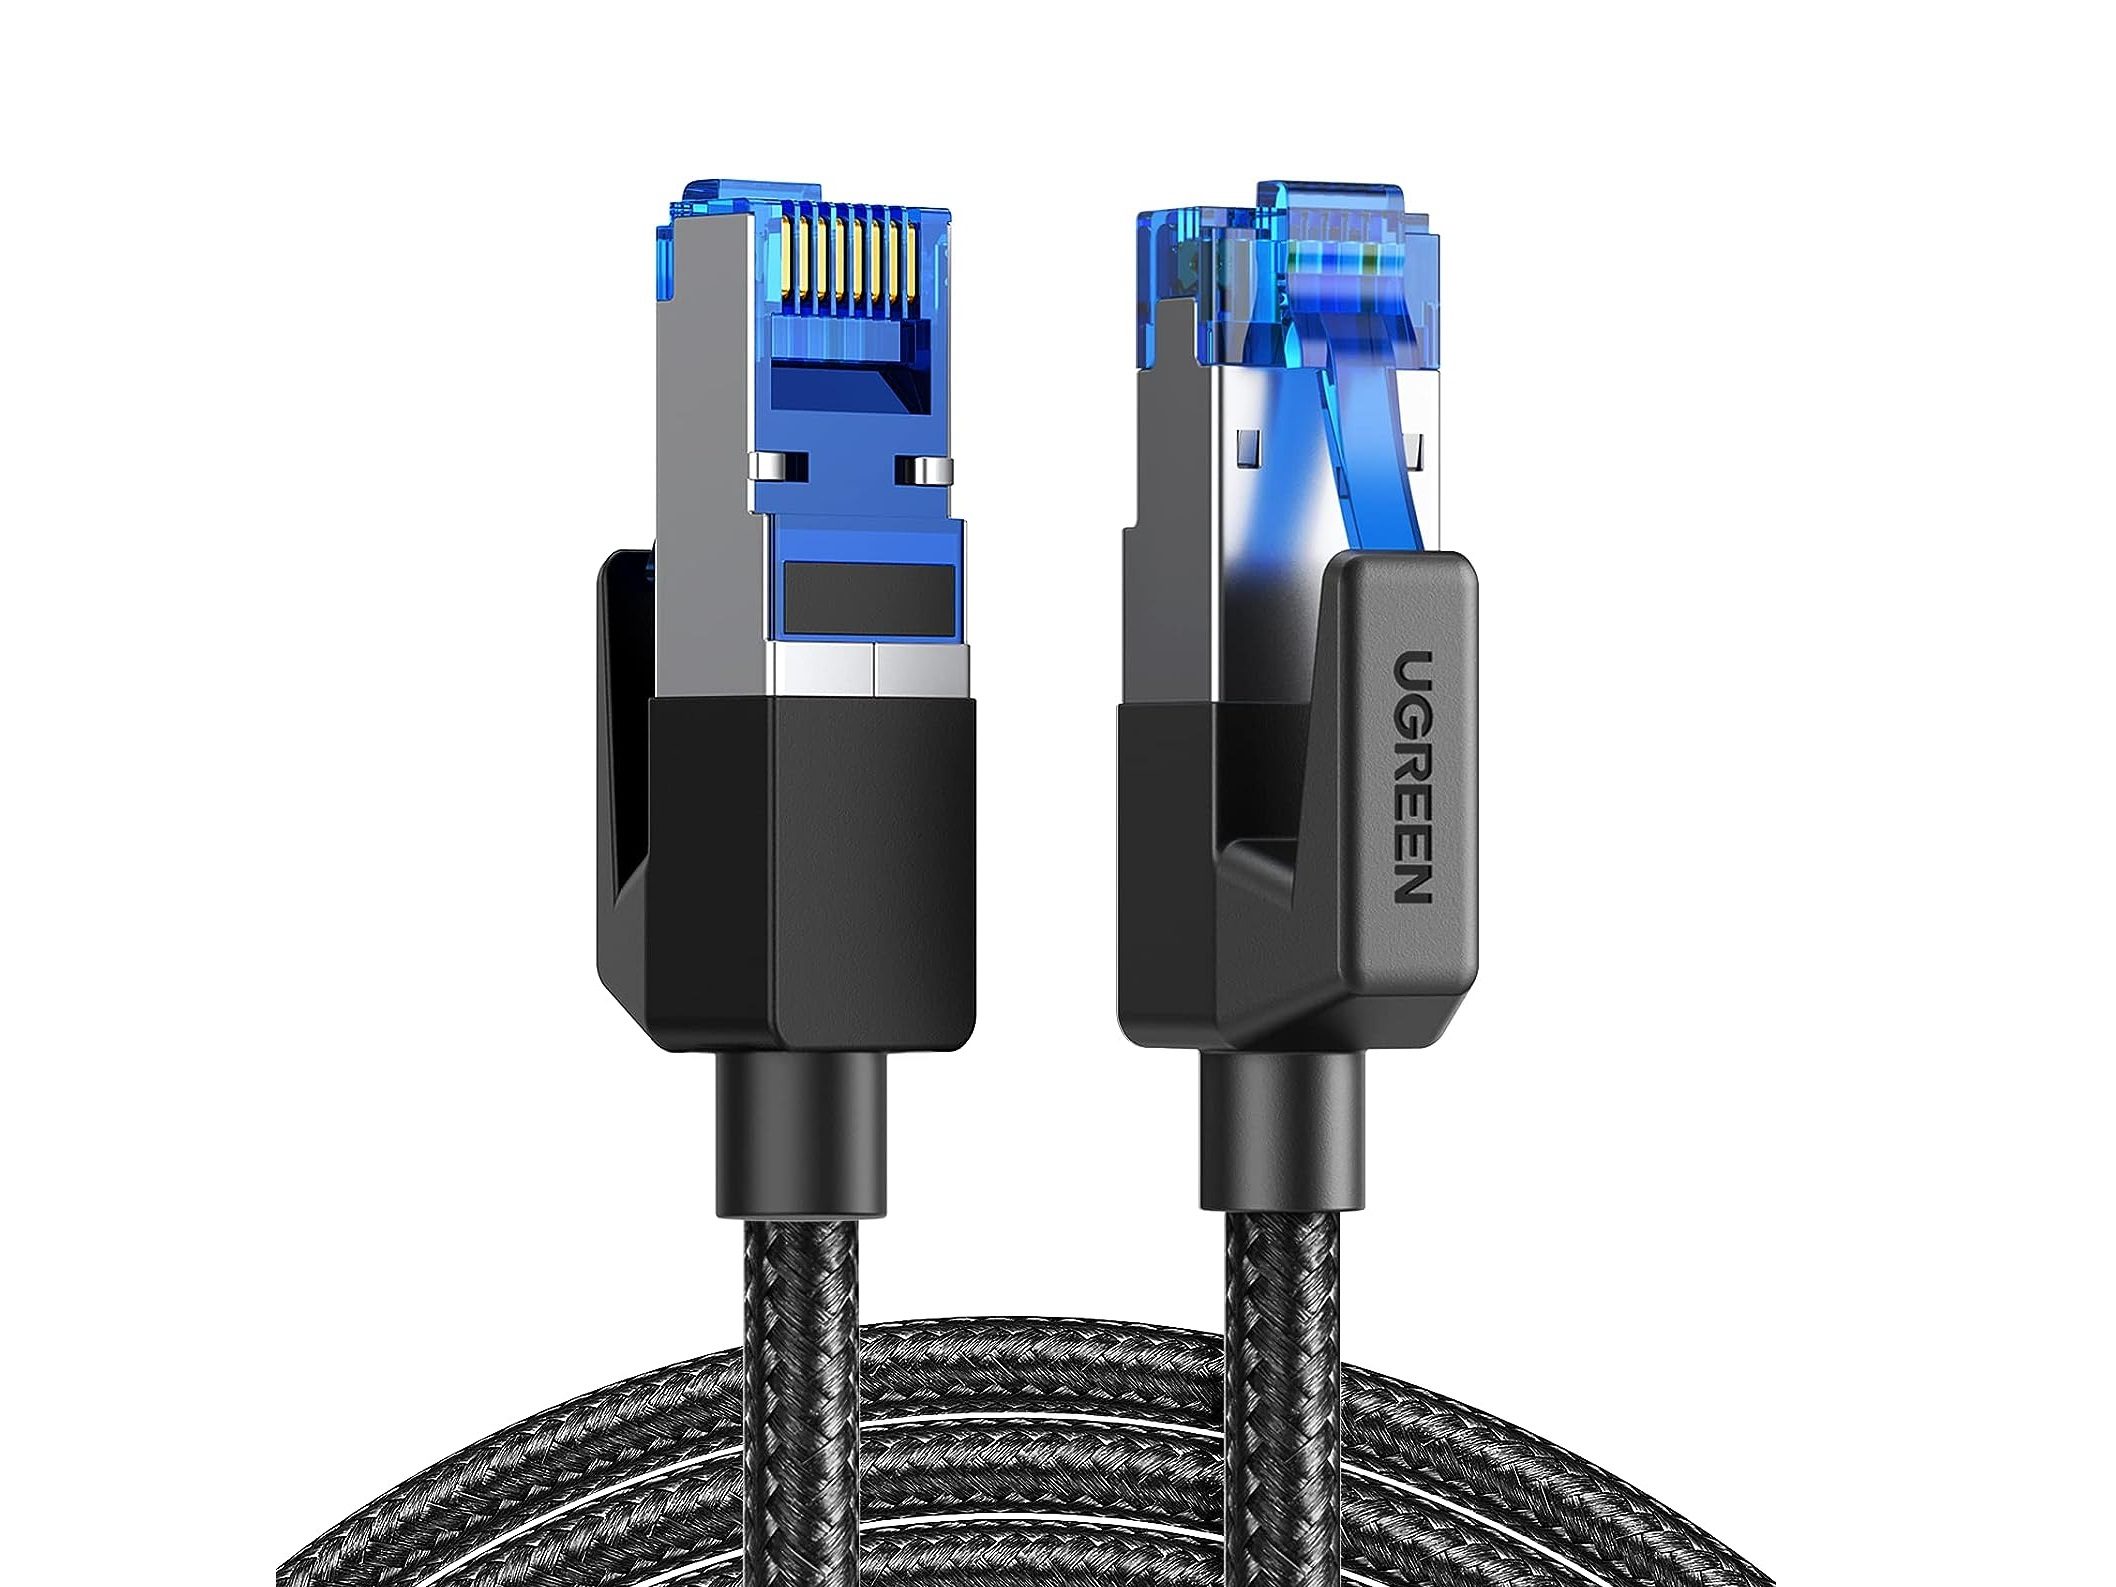 The blue-tipped heads of the Ugreen Cat 8 ethernet cable.